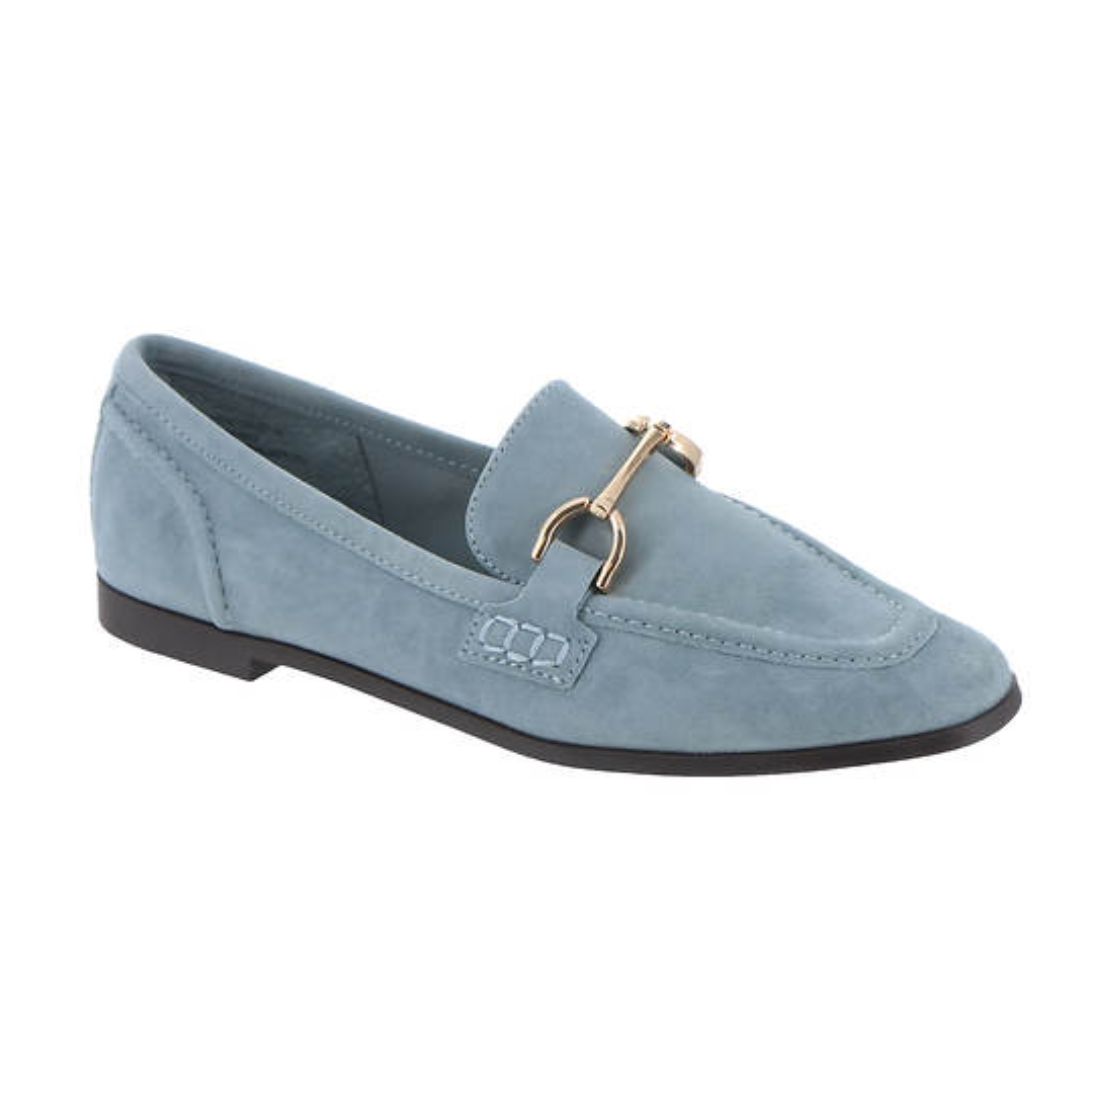 Steve Madden Carrine Loafer in Baby Blue Suede | Cotton Island Women's ...